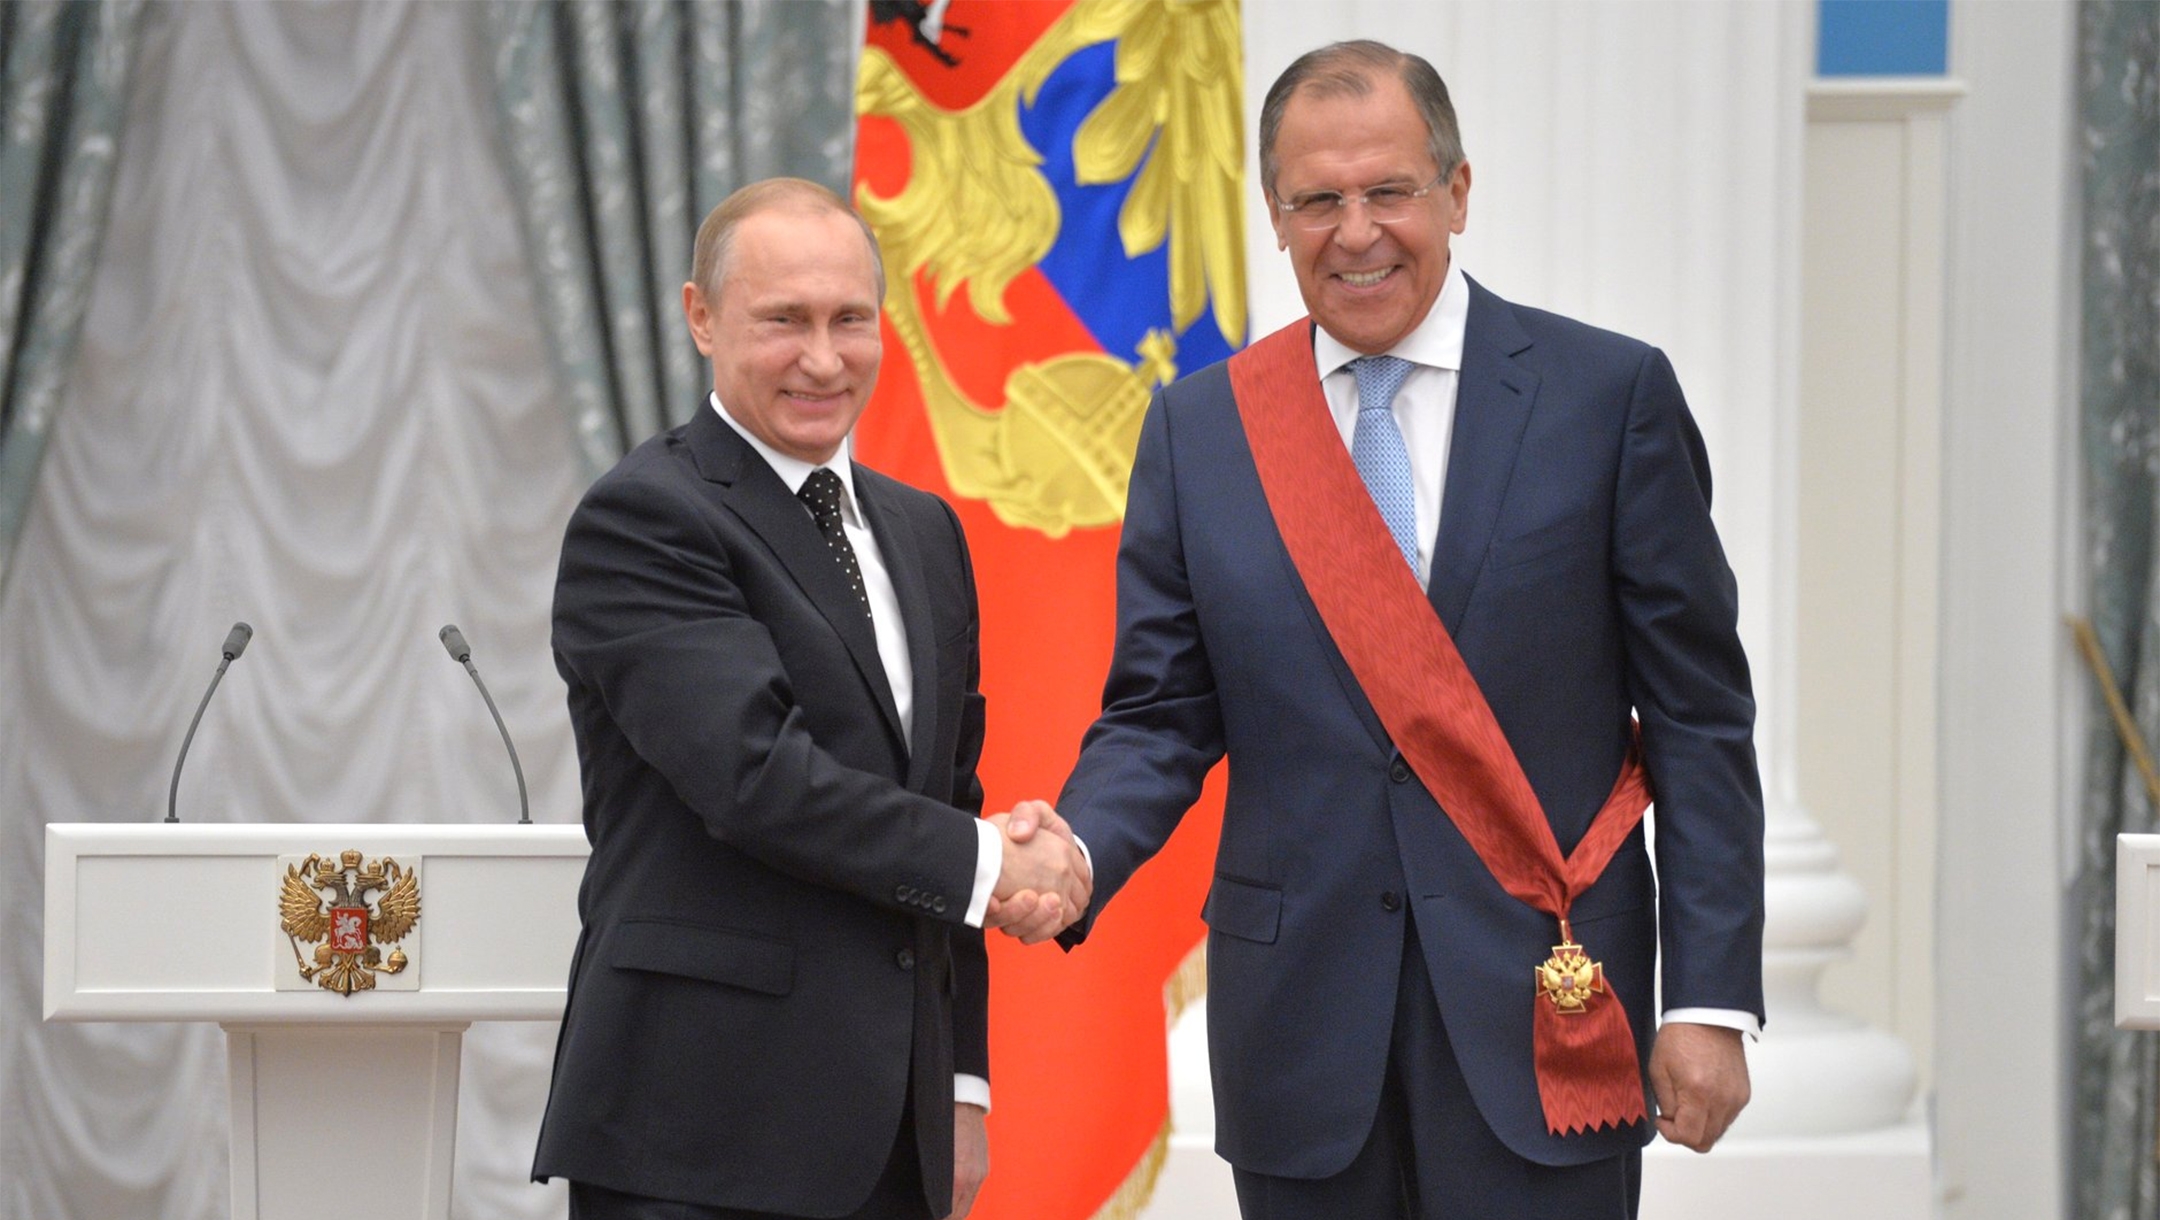 Russian Foreign Minister Sergei Lavrov, right, shakes hands with President Vladimir Putin in Moscow, May 21, 2015. (Kremlin media center)